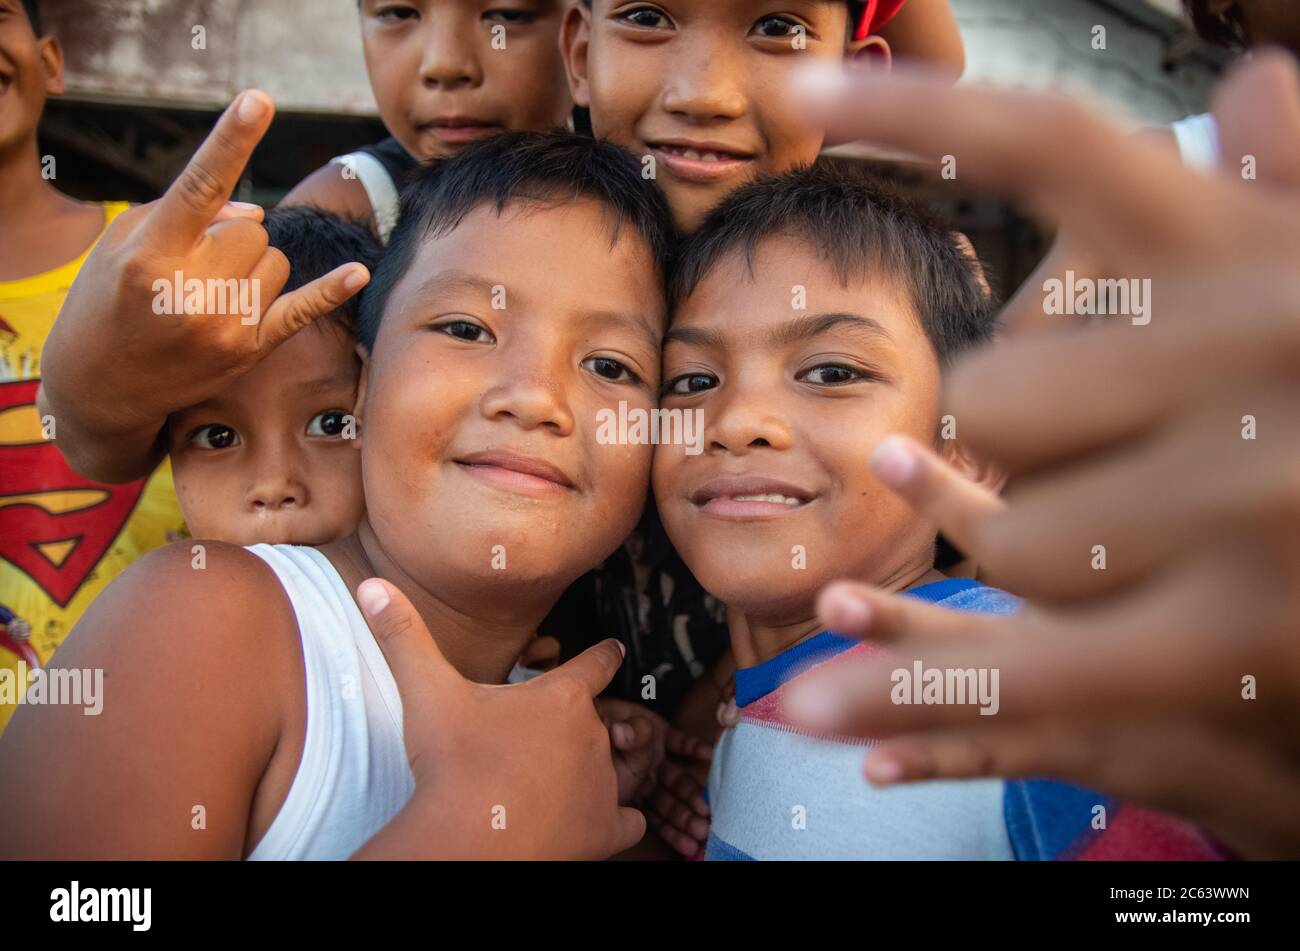 A group of happy young Filipino boys posing for picture, Catbalogan City, Samar Island, Philippines. Stock Photo